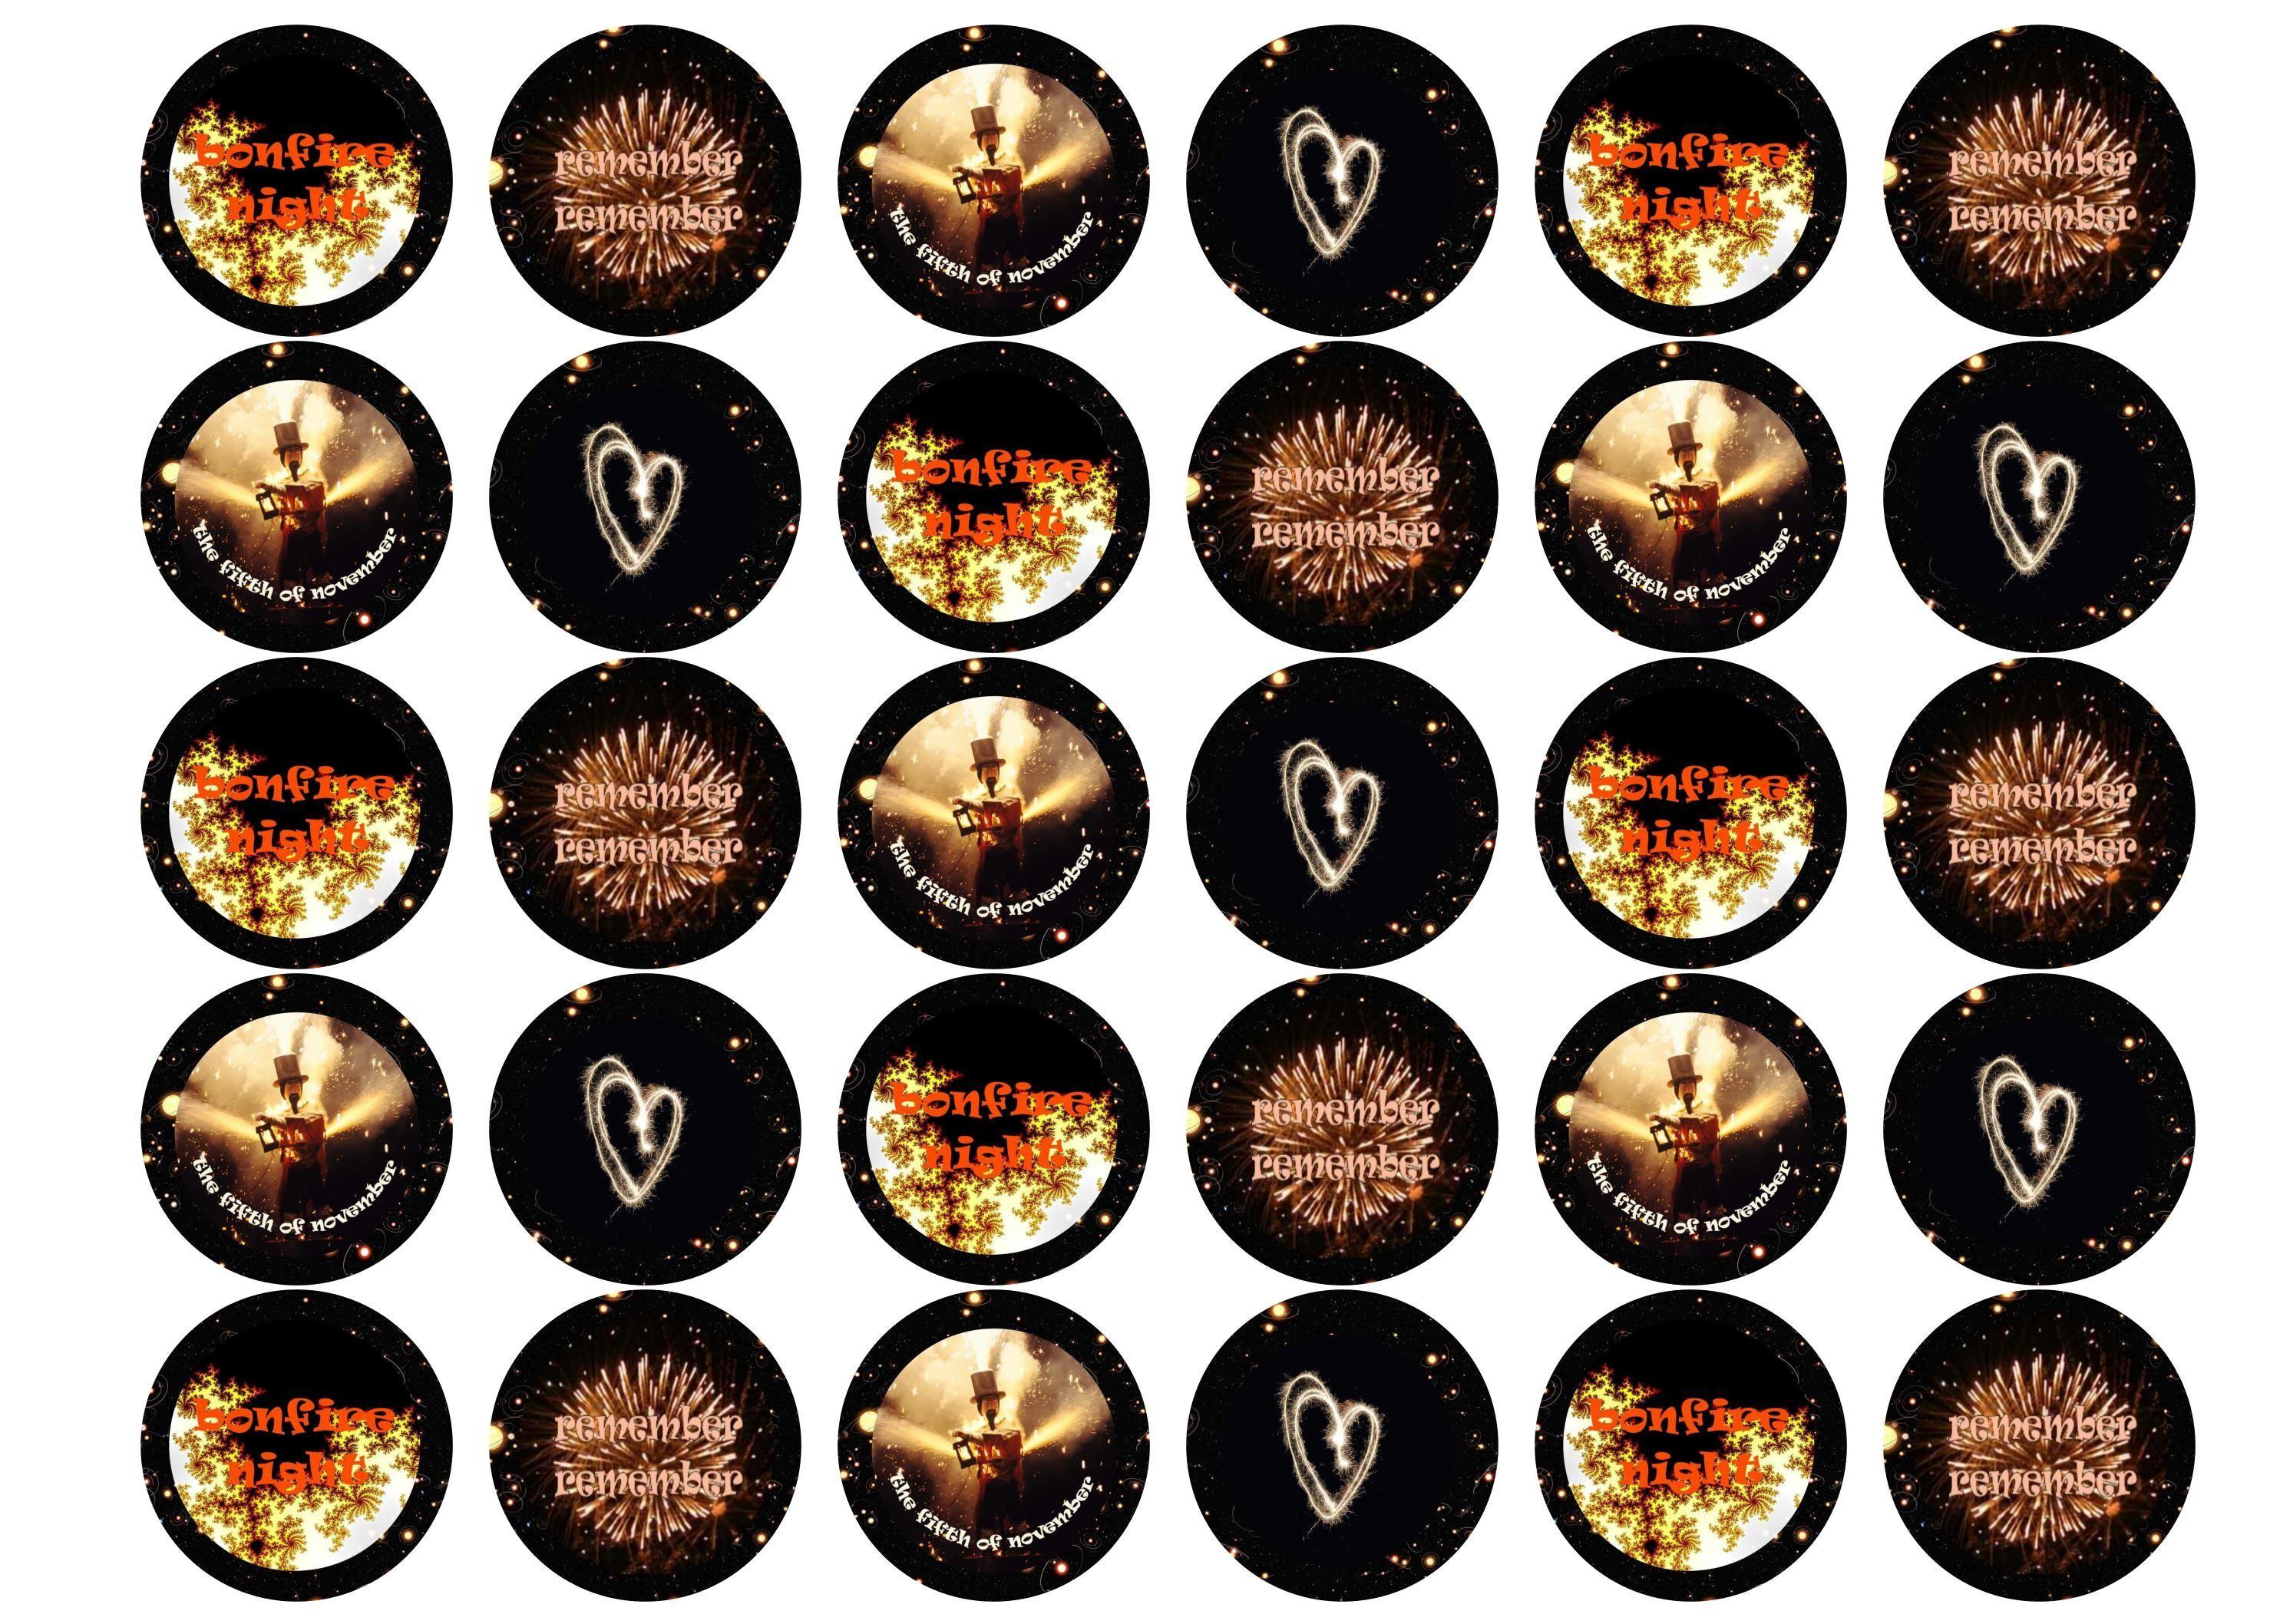 Printed edible cupcake toppers with images of Bonfire night